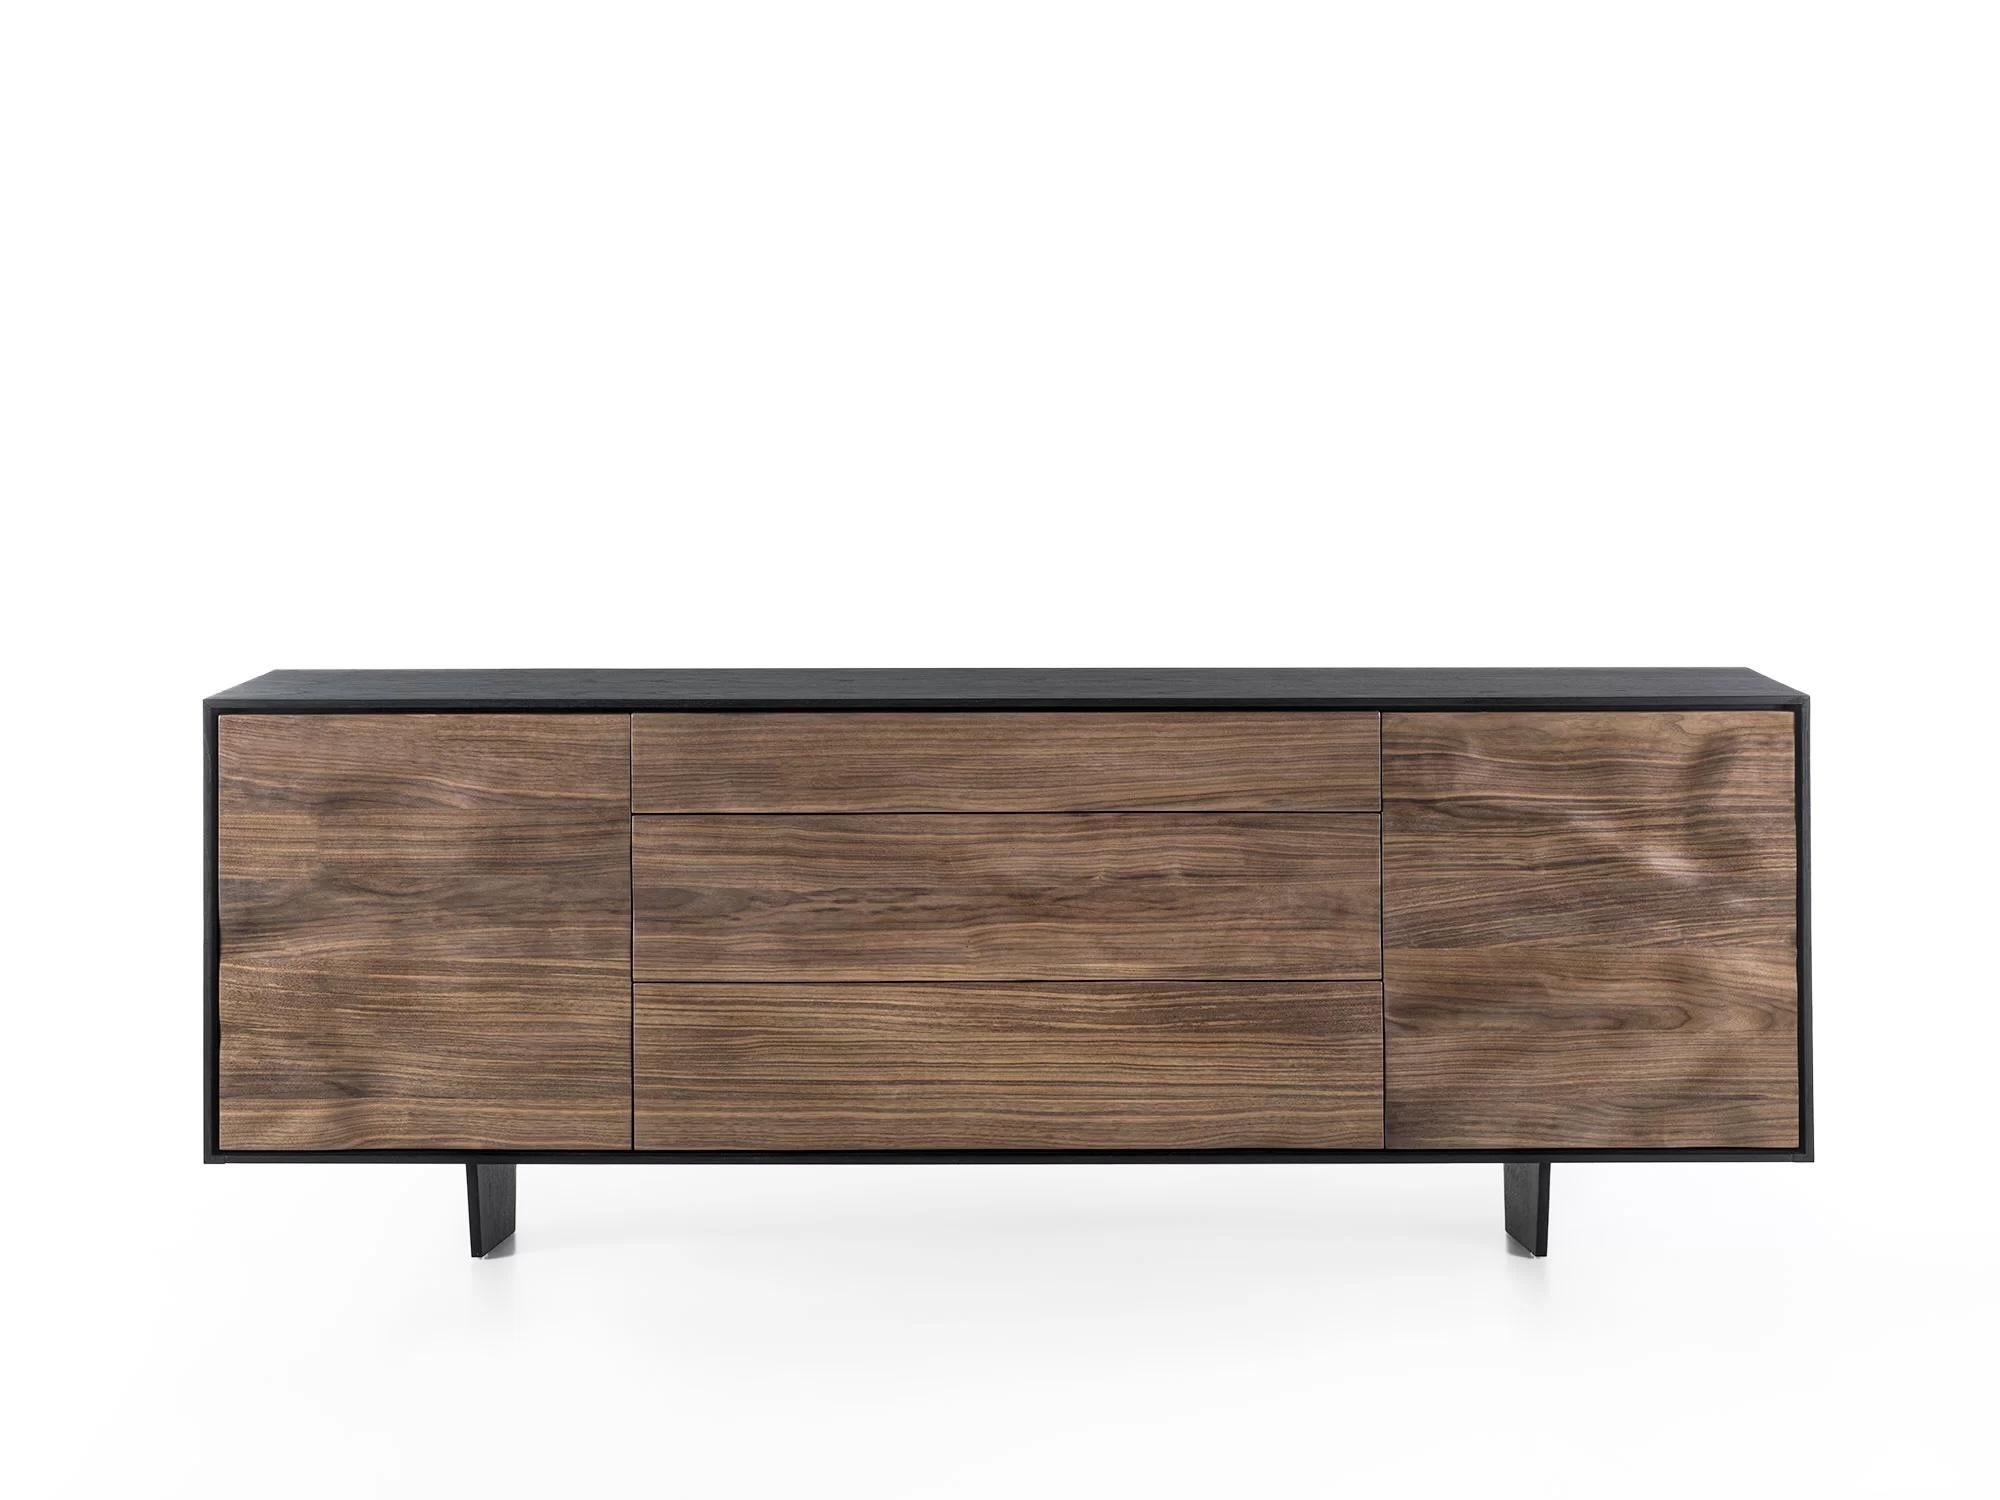 Solid wood and blockboard sideboard with a wooden frame. The unique processing technique applied to the doors and the front of the drawers creates a sculptural effect through the extroflection of the wood, endowing it with a sinuous movement. 

Made